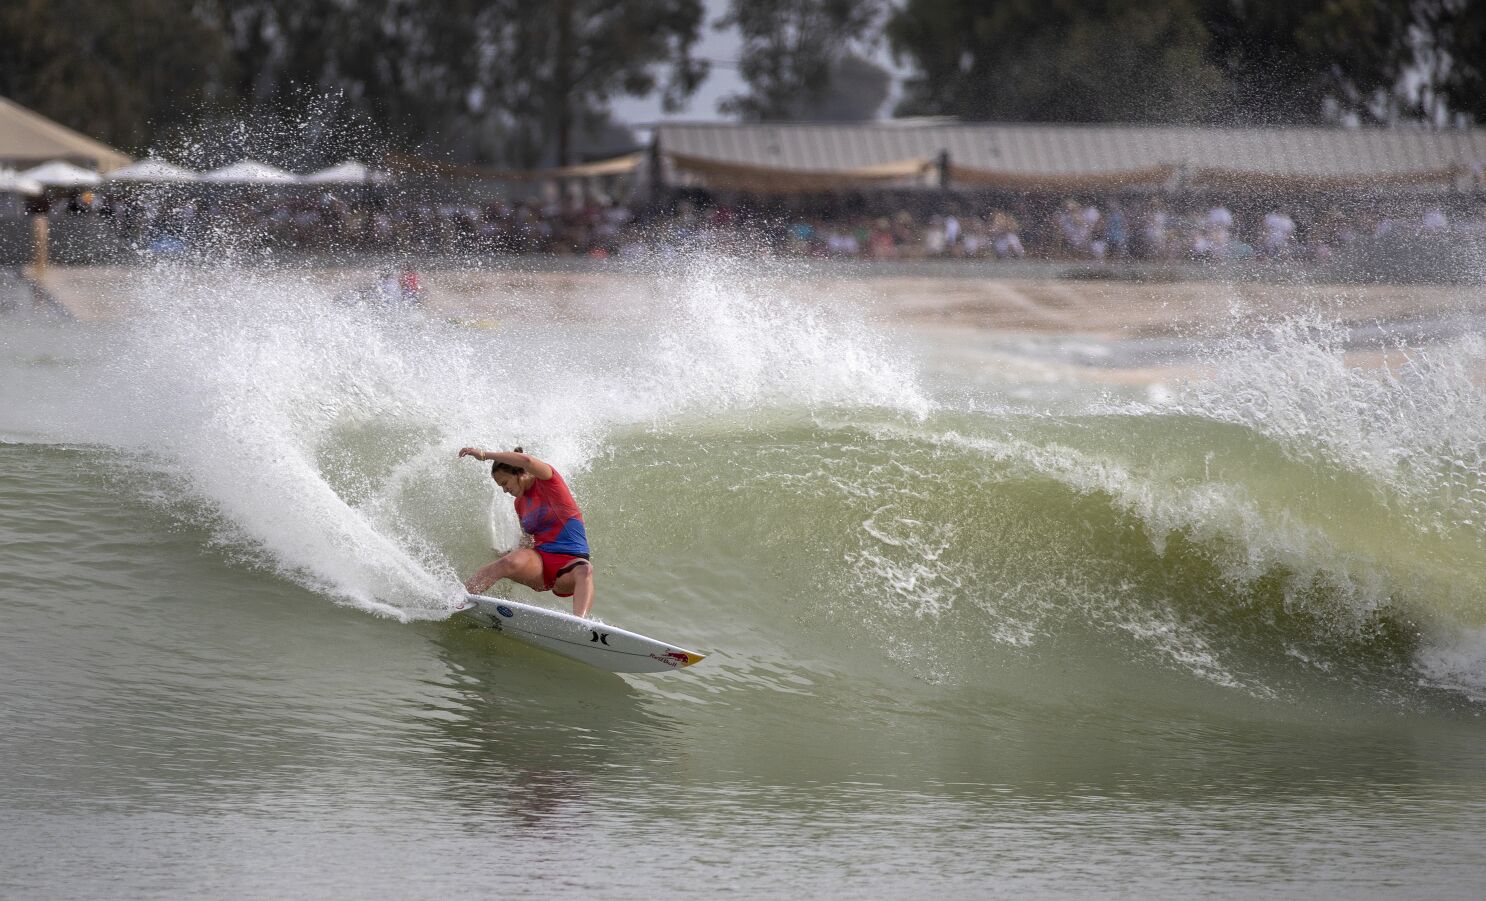 California's hottest surf spot is Kelly Slater-designed artificial wave pool miles inland - Los Times